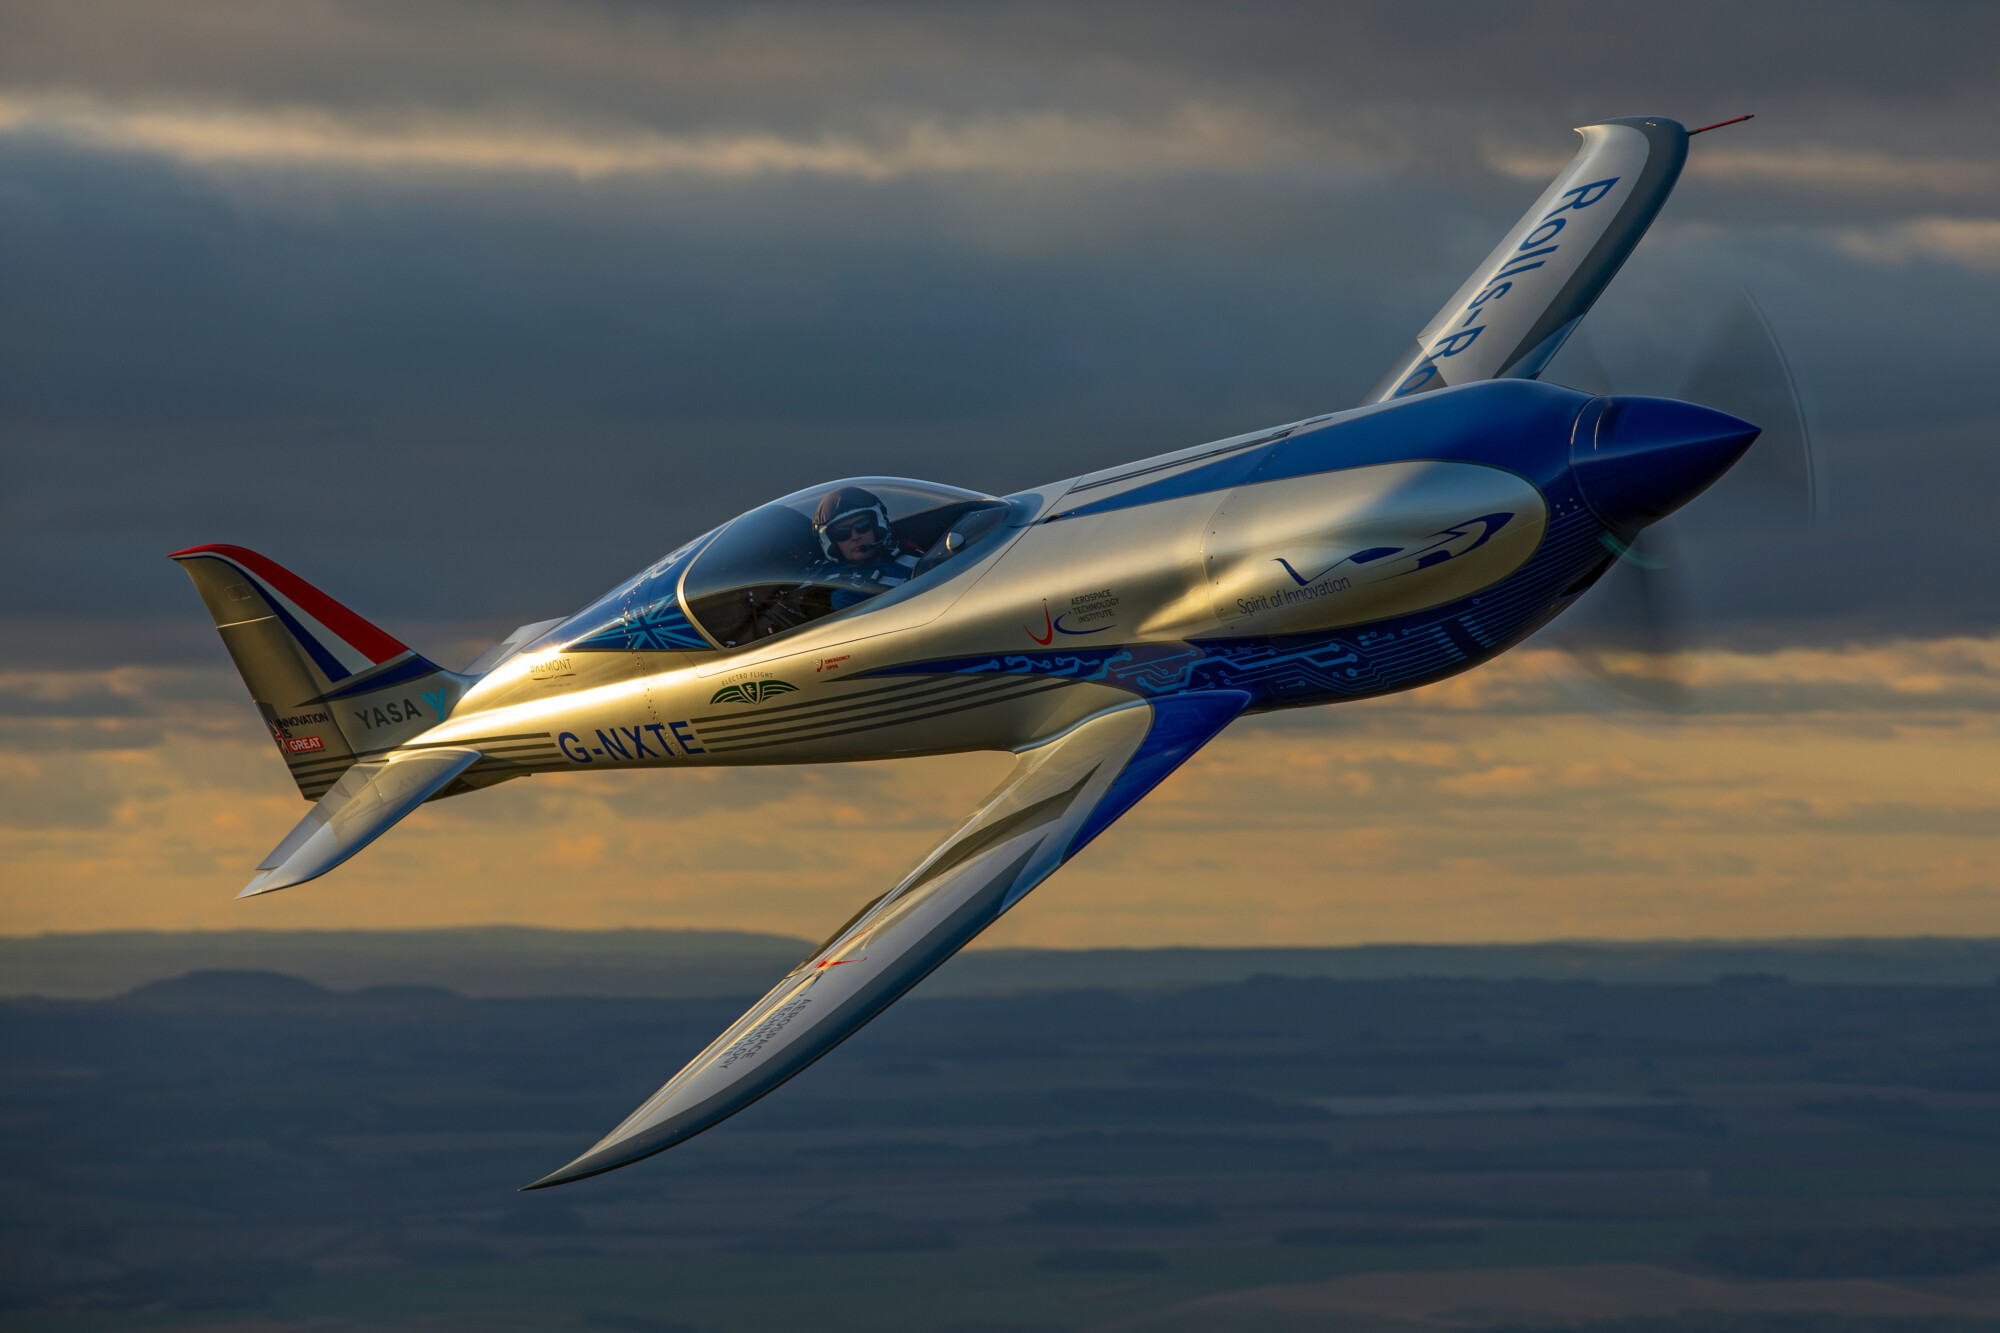 Rolls-Royce Claims to Have Developed the World’s Fastest All-Electric Aircraft